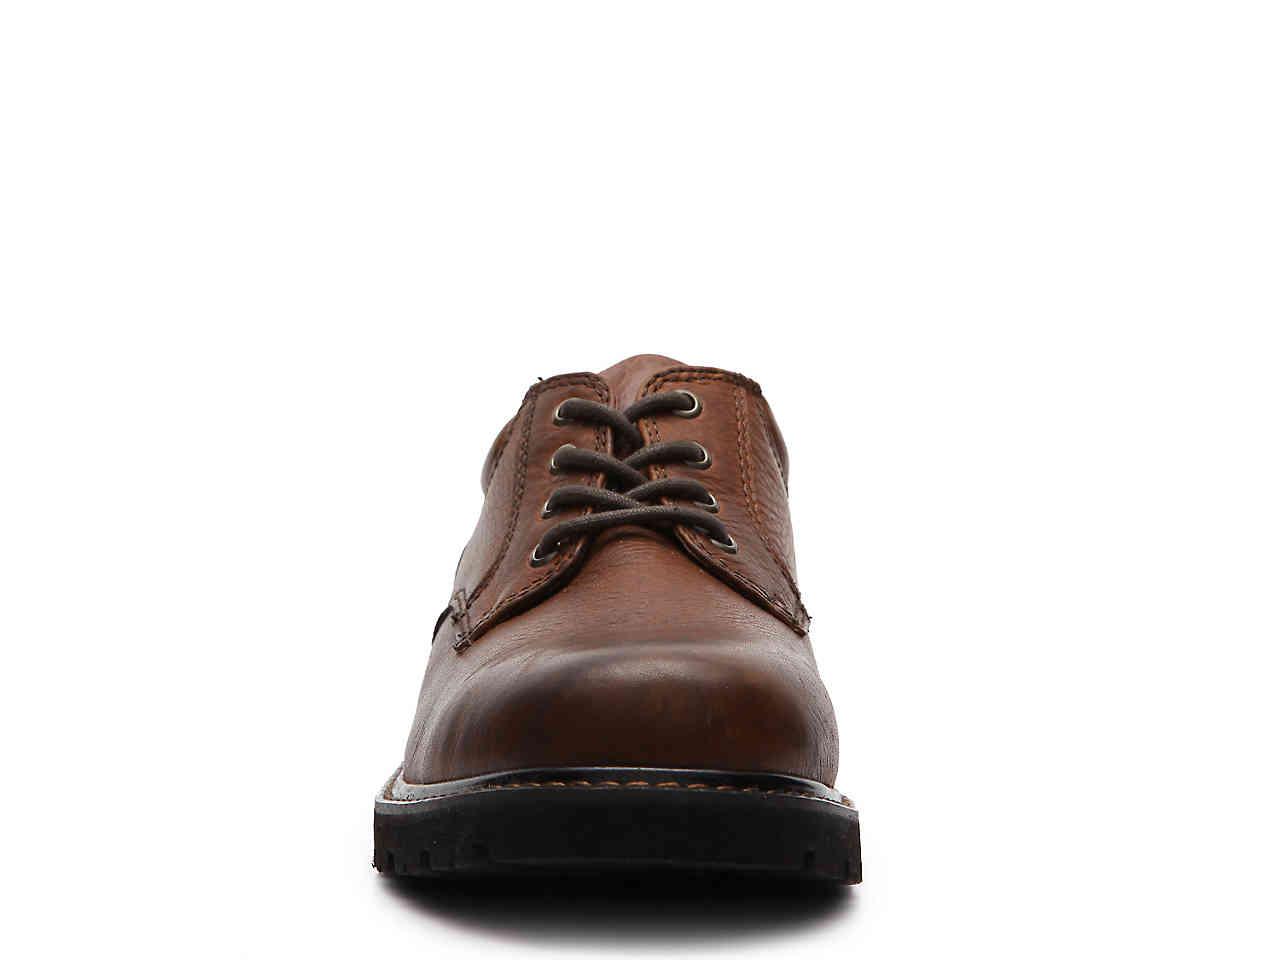 Dockers Leather Shelter Oxford in Brown for Men - Lyst